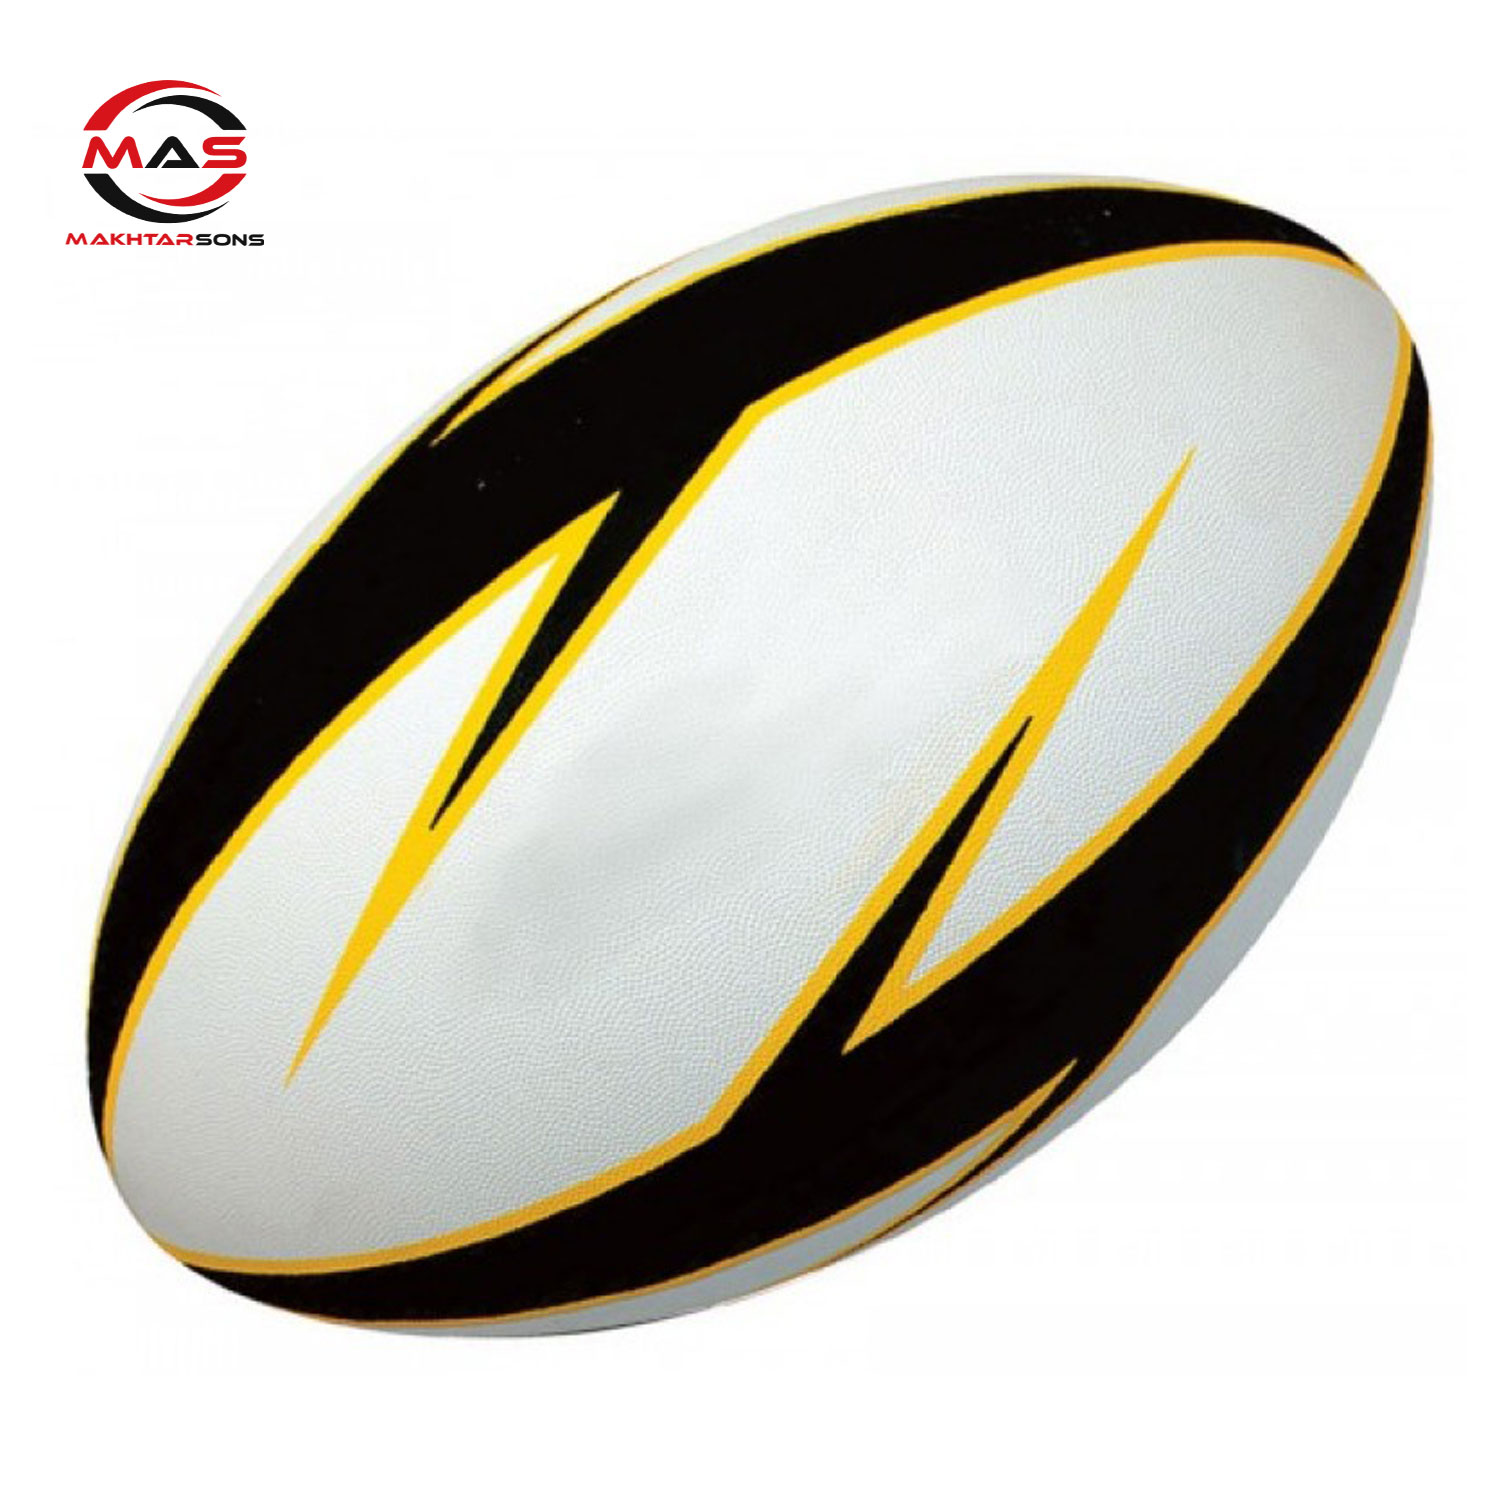 RUGBY BALL | MAS 428